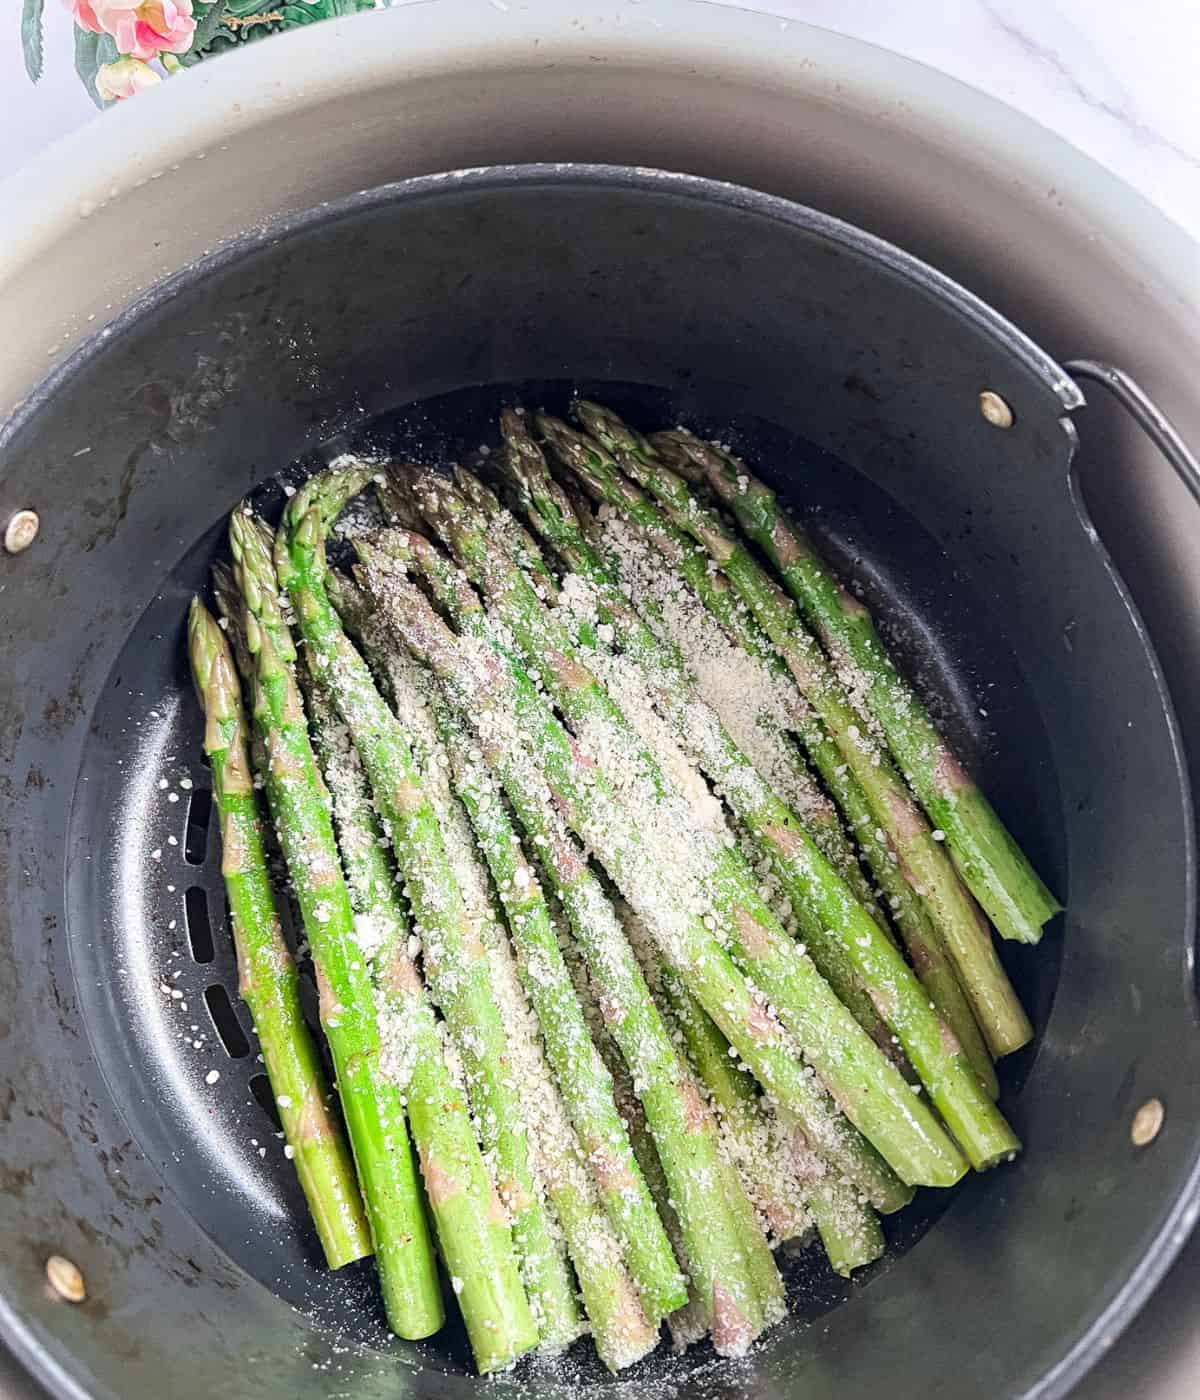 Preparing to air-fry the asparagus in the basket with seasonings and parmesan cheese on top.